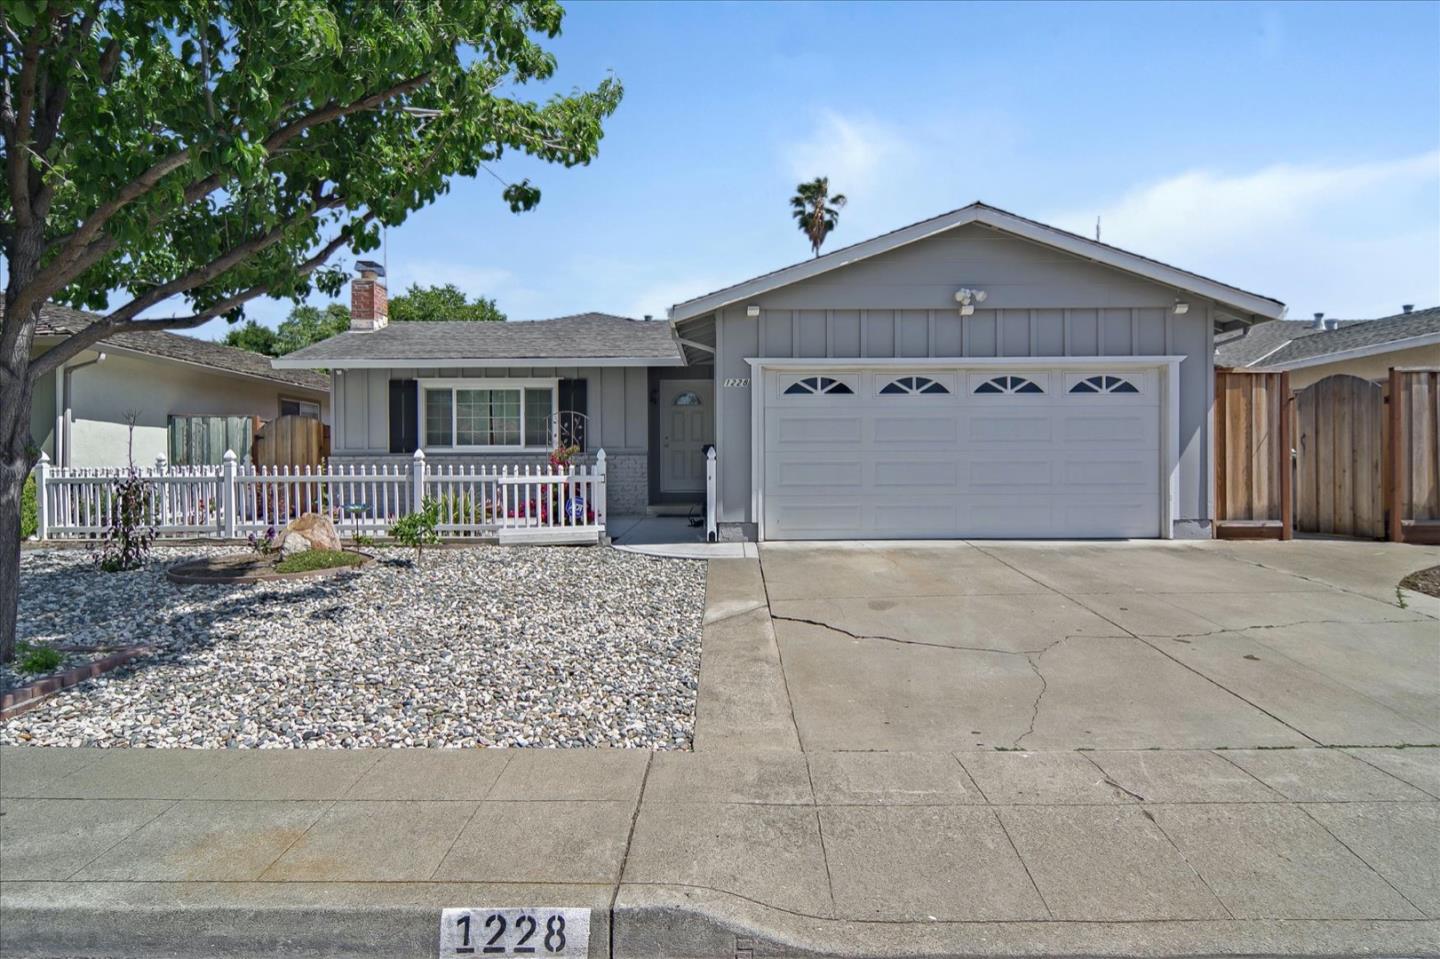 1228 Olympic Dr, Milpitas, CA, 95035